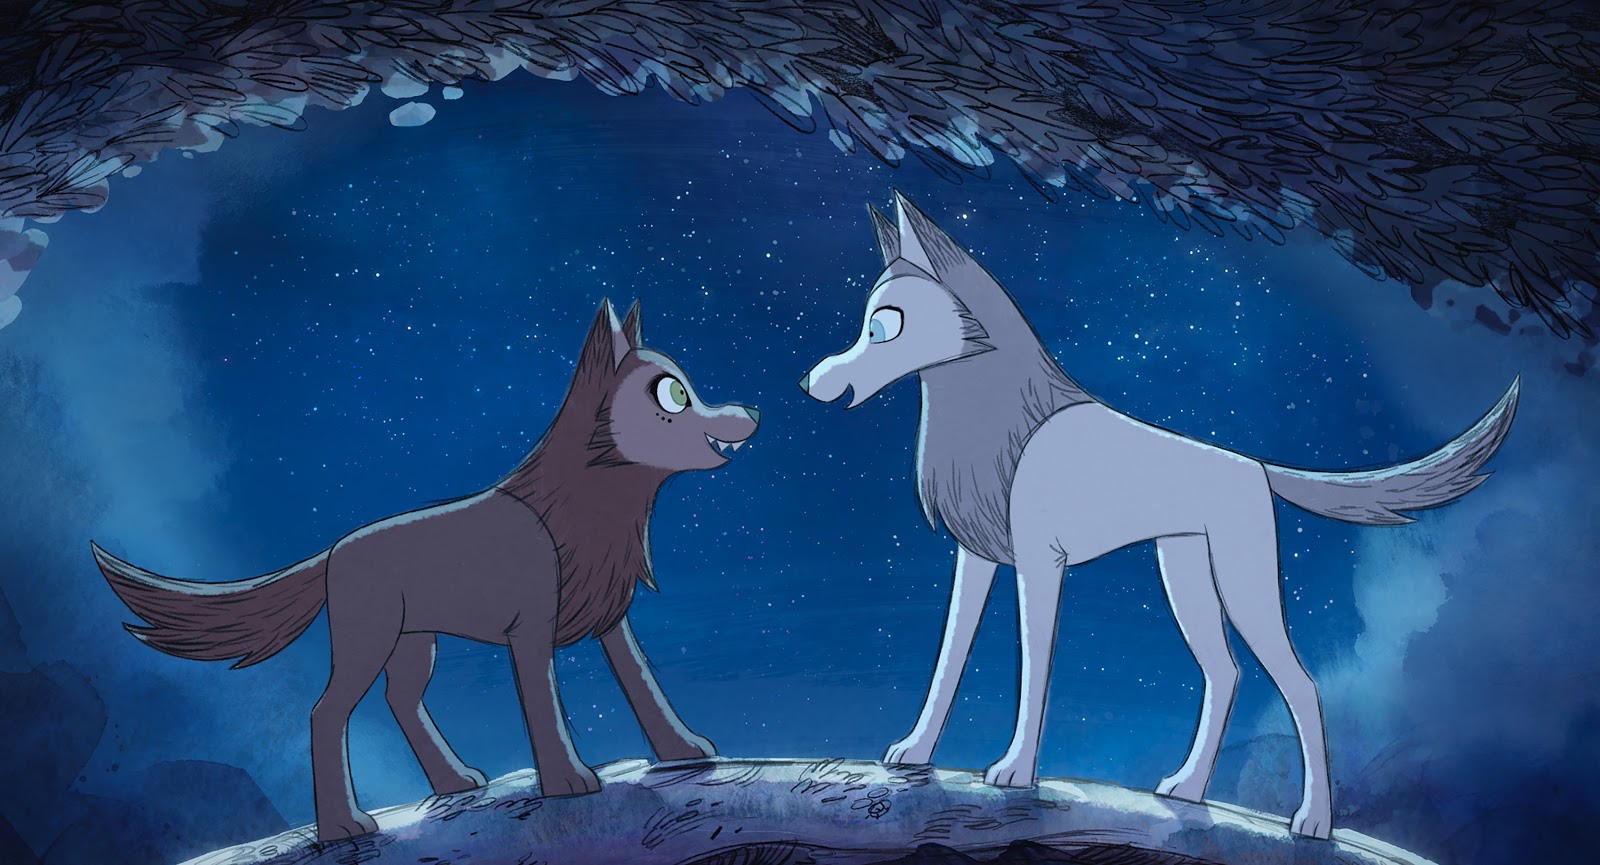 Mebh and Robyn in wolf form